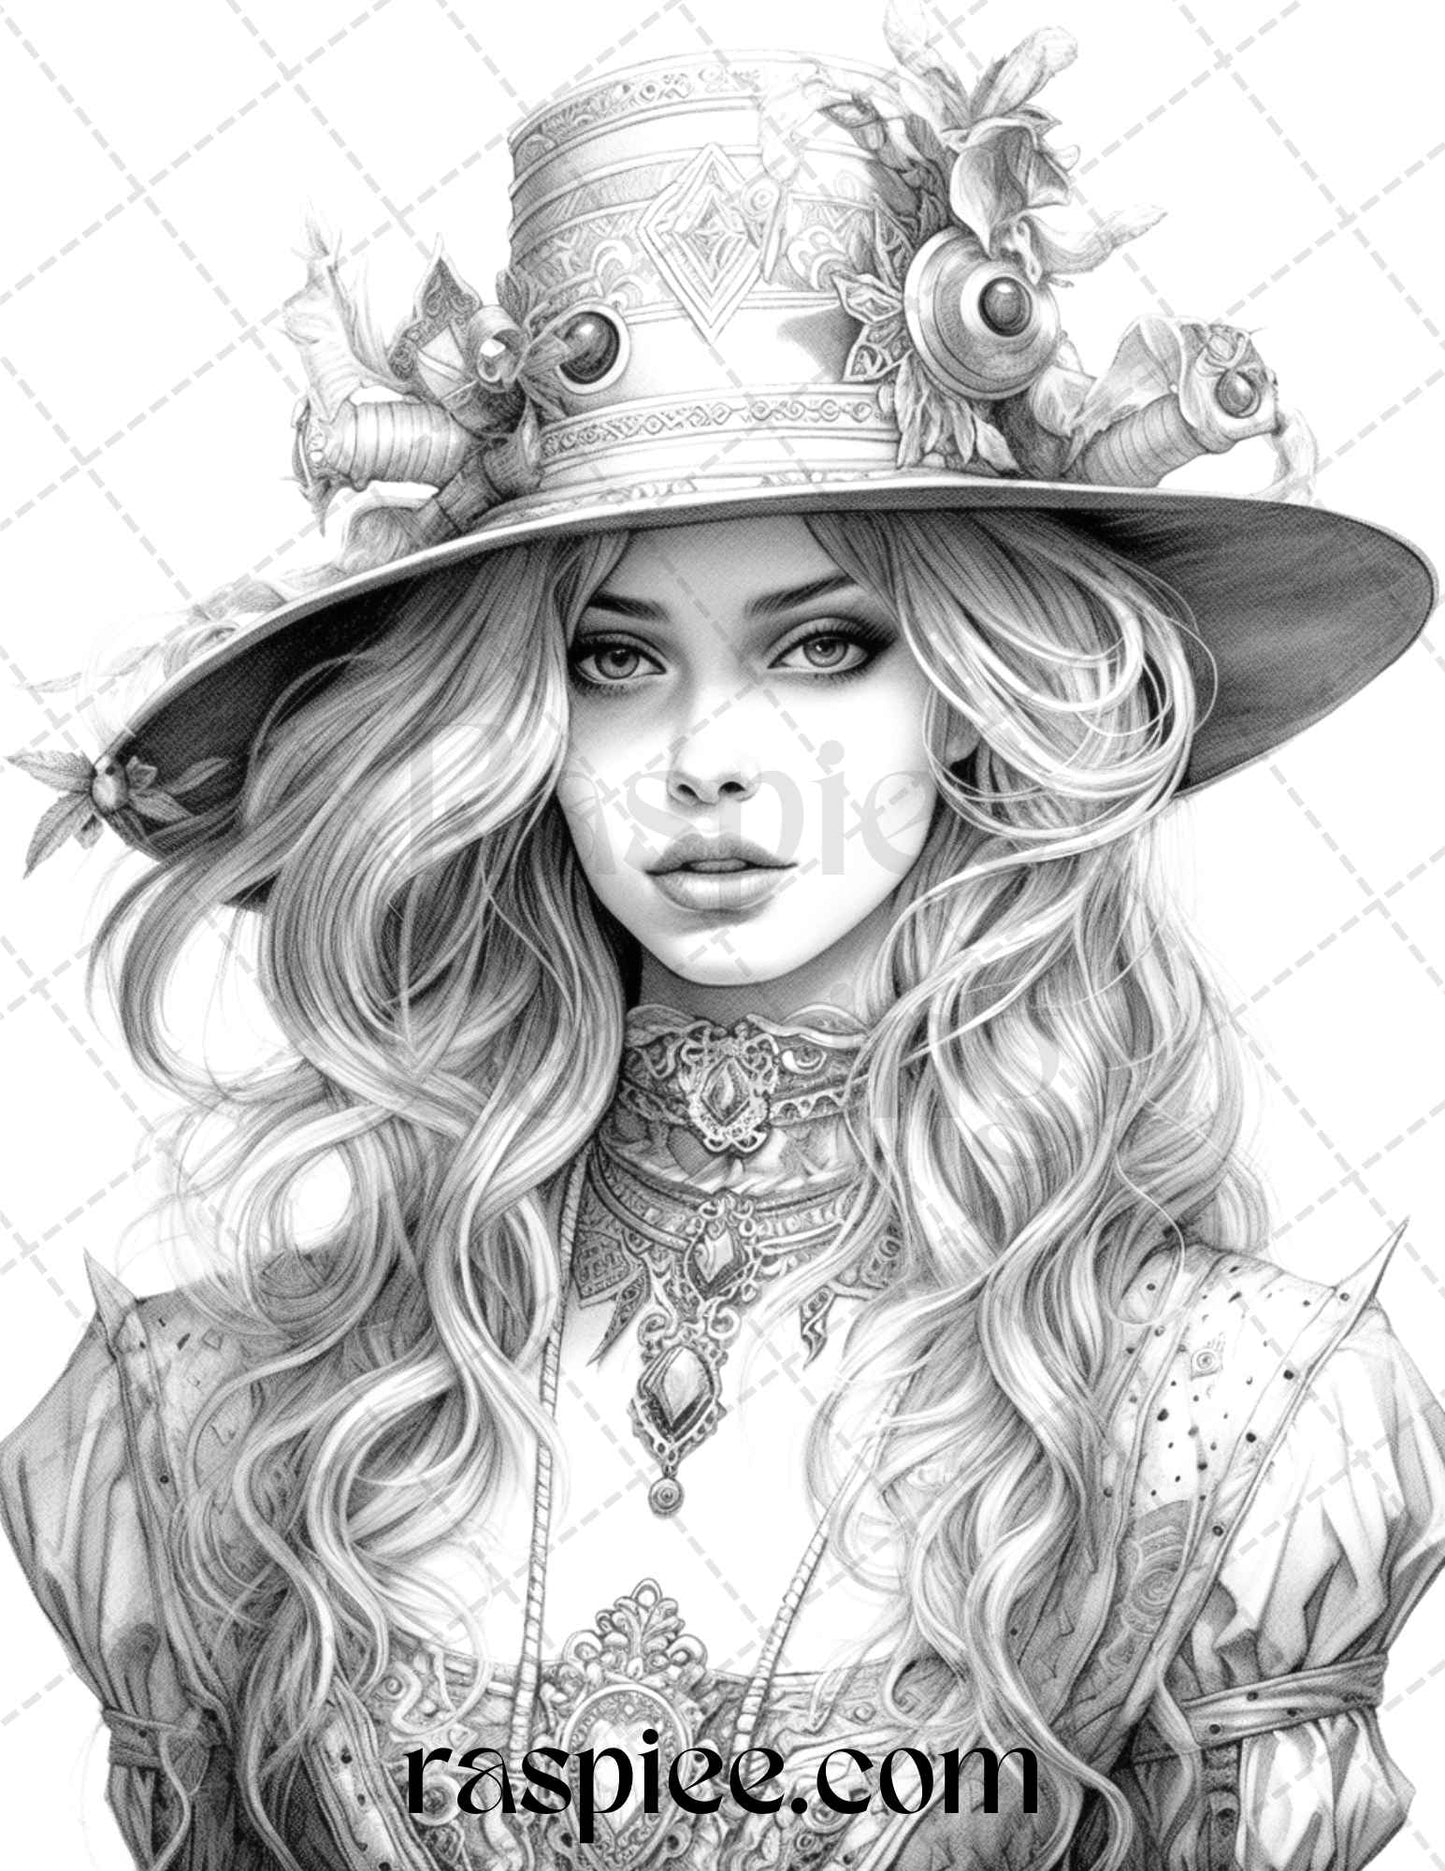 40 Beautiful Witches Grayscale Coloring Pages Printable for Adults, PDF File Instant Download - raspiee